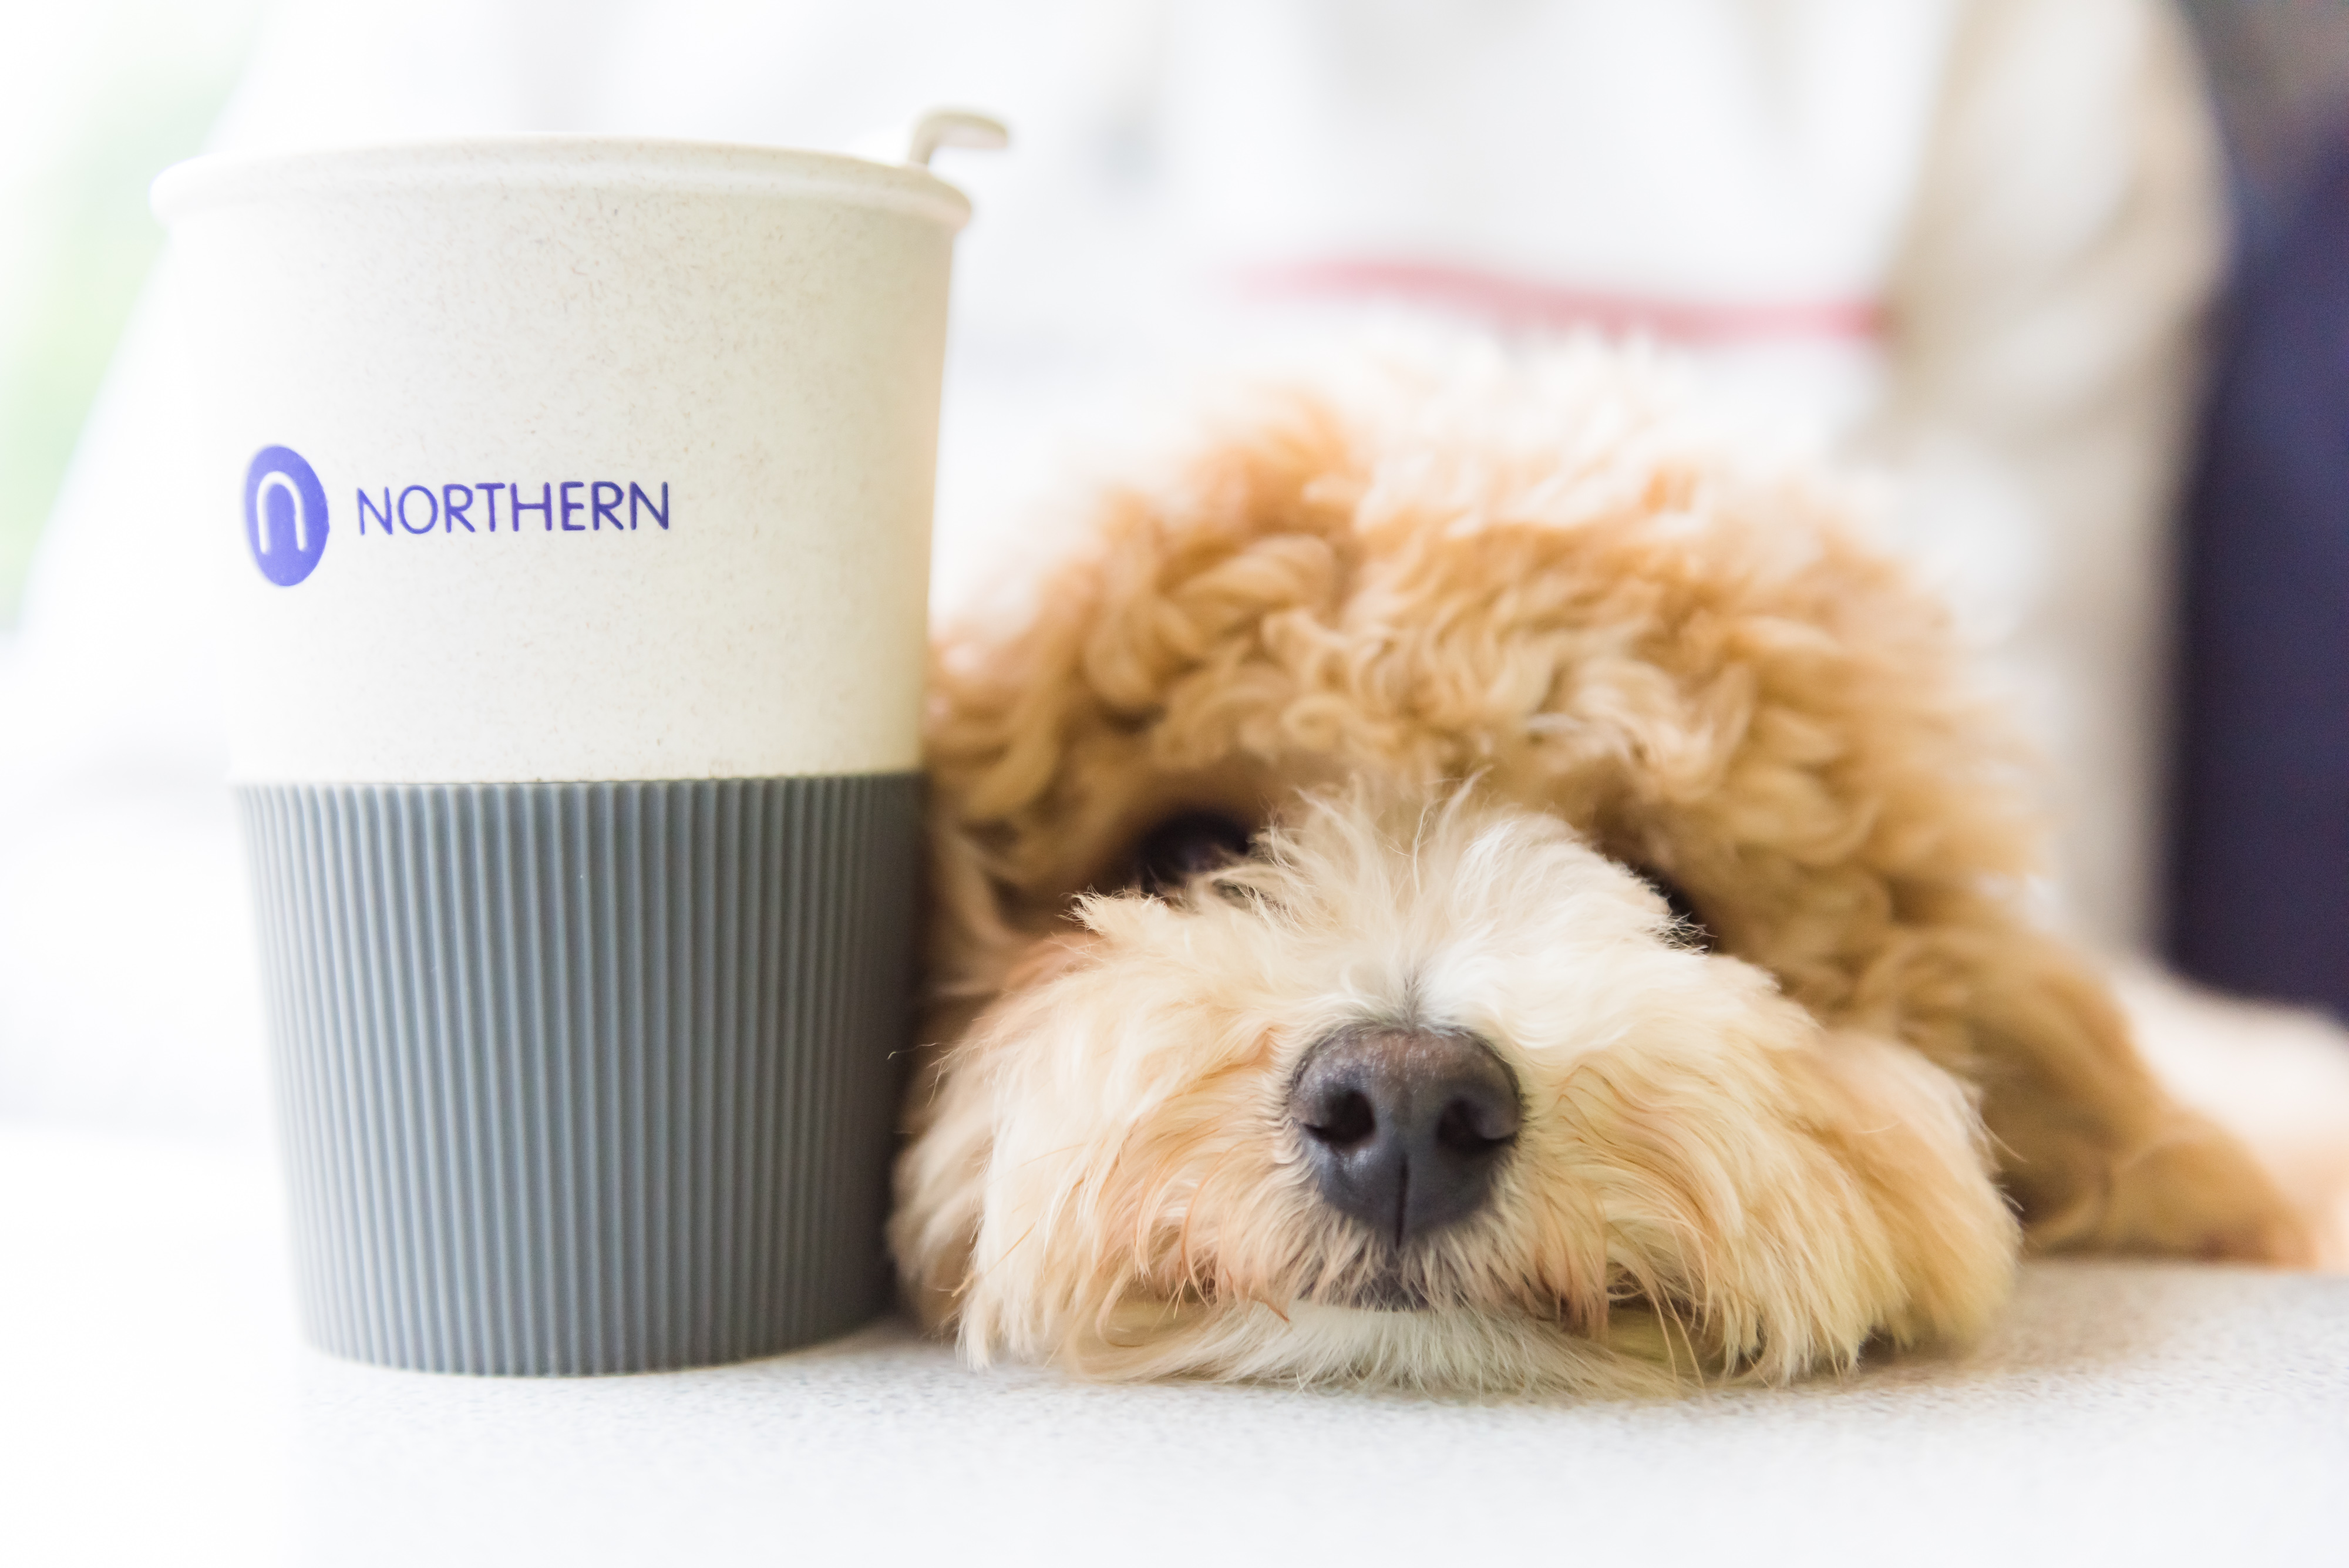 Image of a dog resting its head next to a Northern branded coffee cup